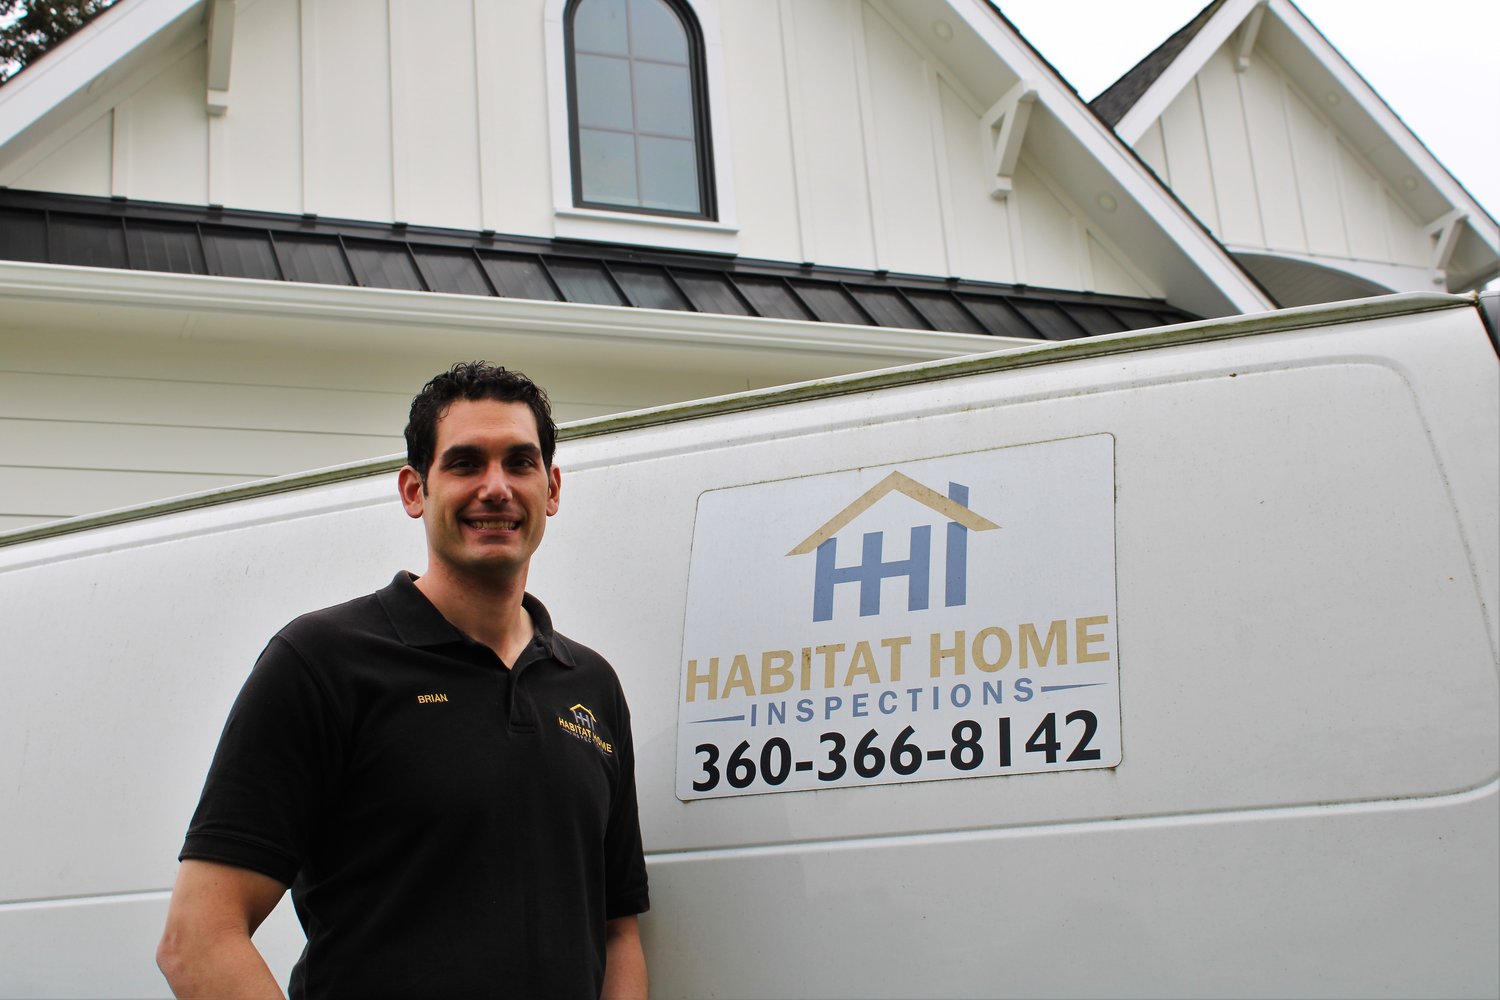 Habitat Home Inspections owner Brian Mattioli donates 10 percent of his gross business income to Habitat For Humanity in Whatcom County.